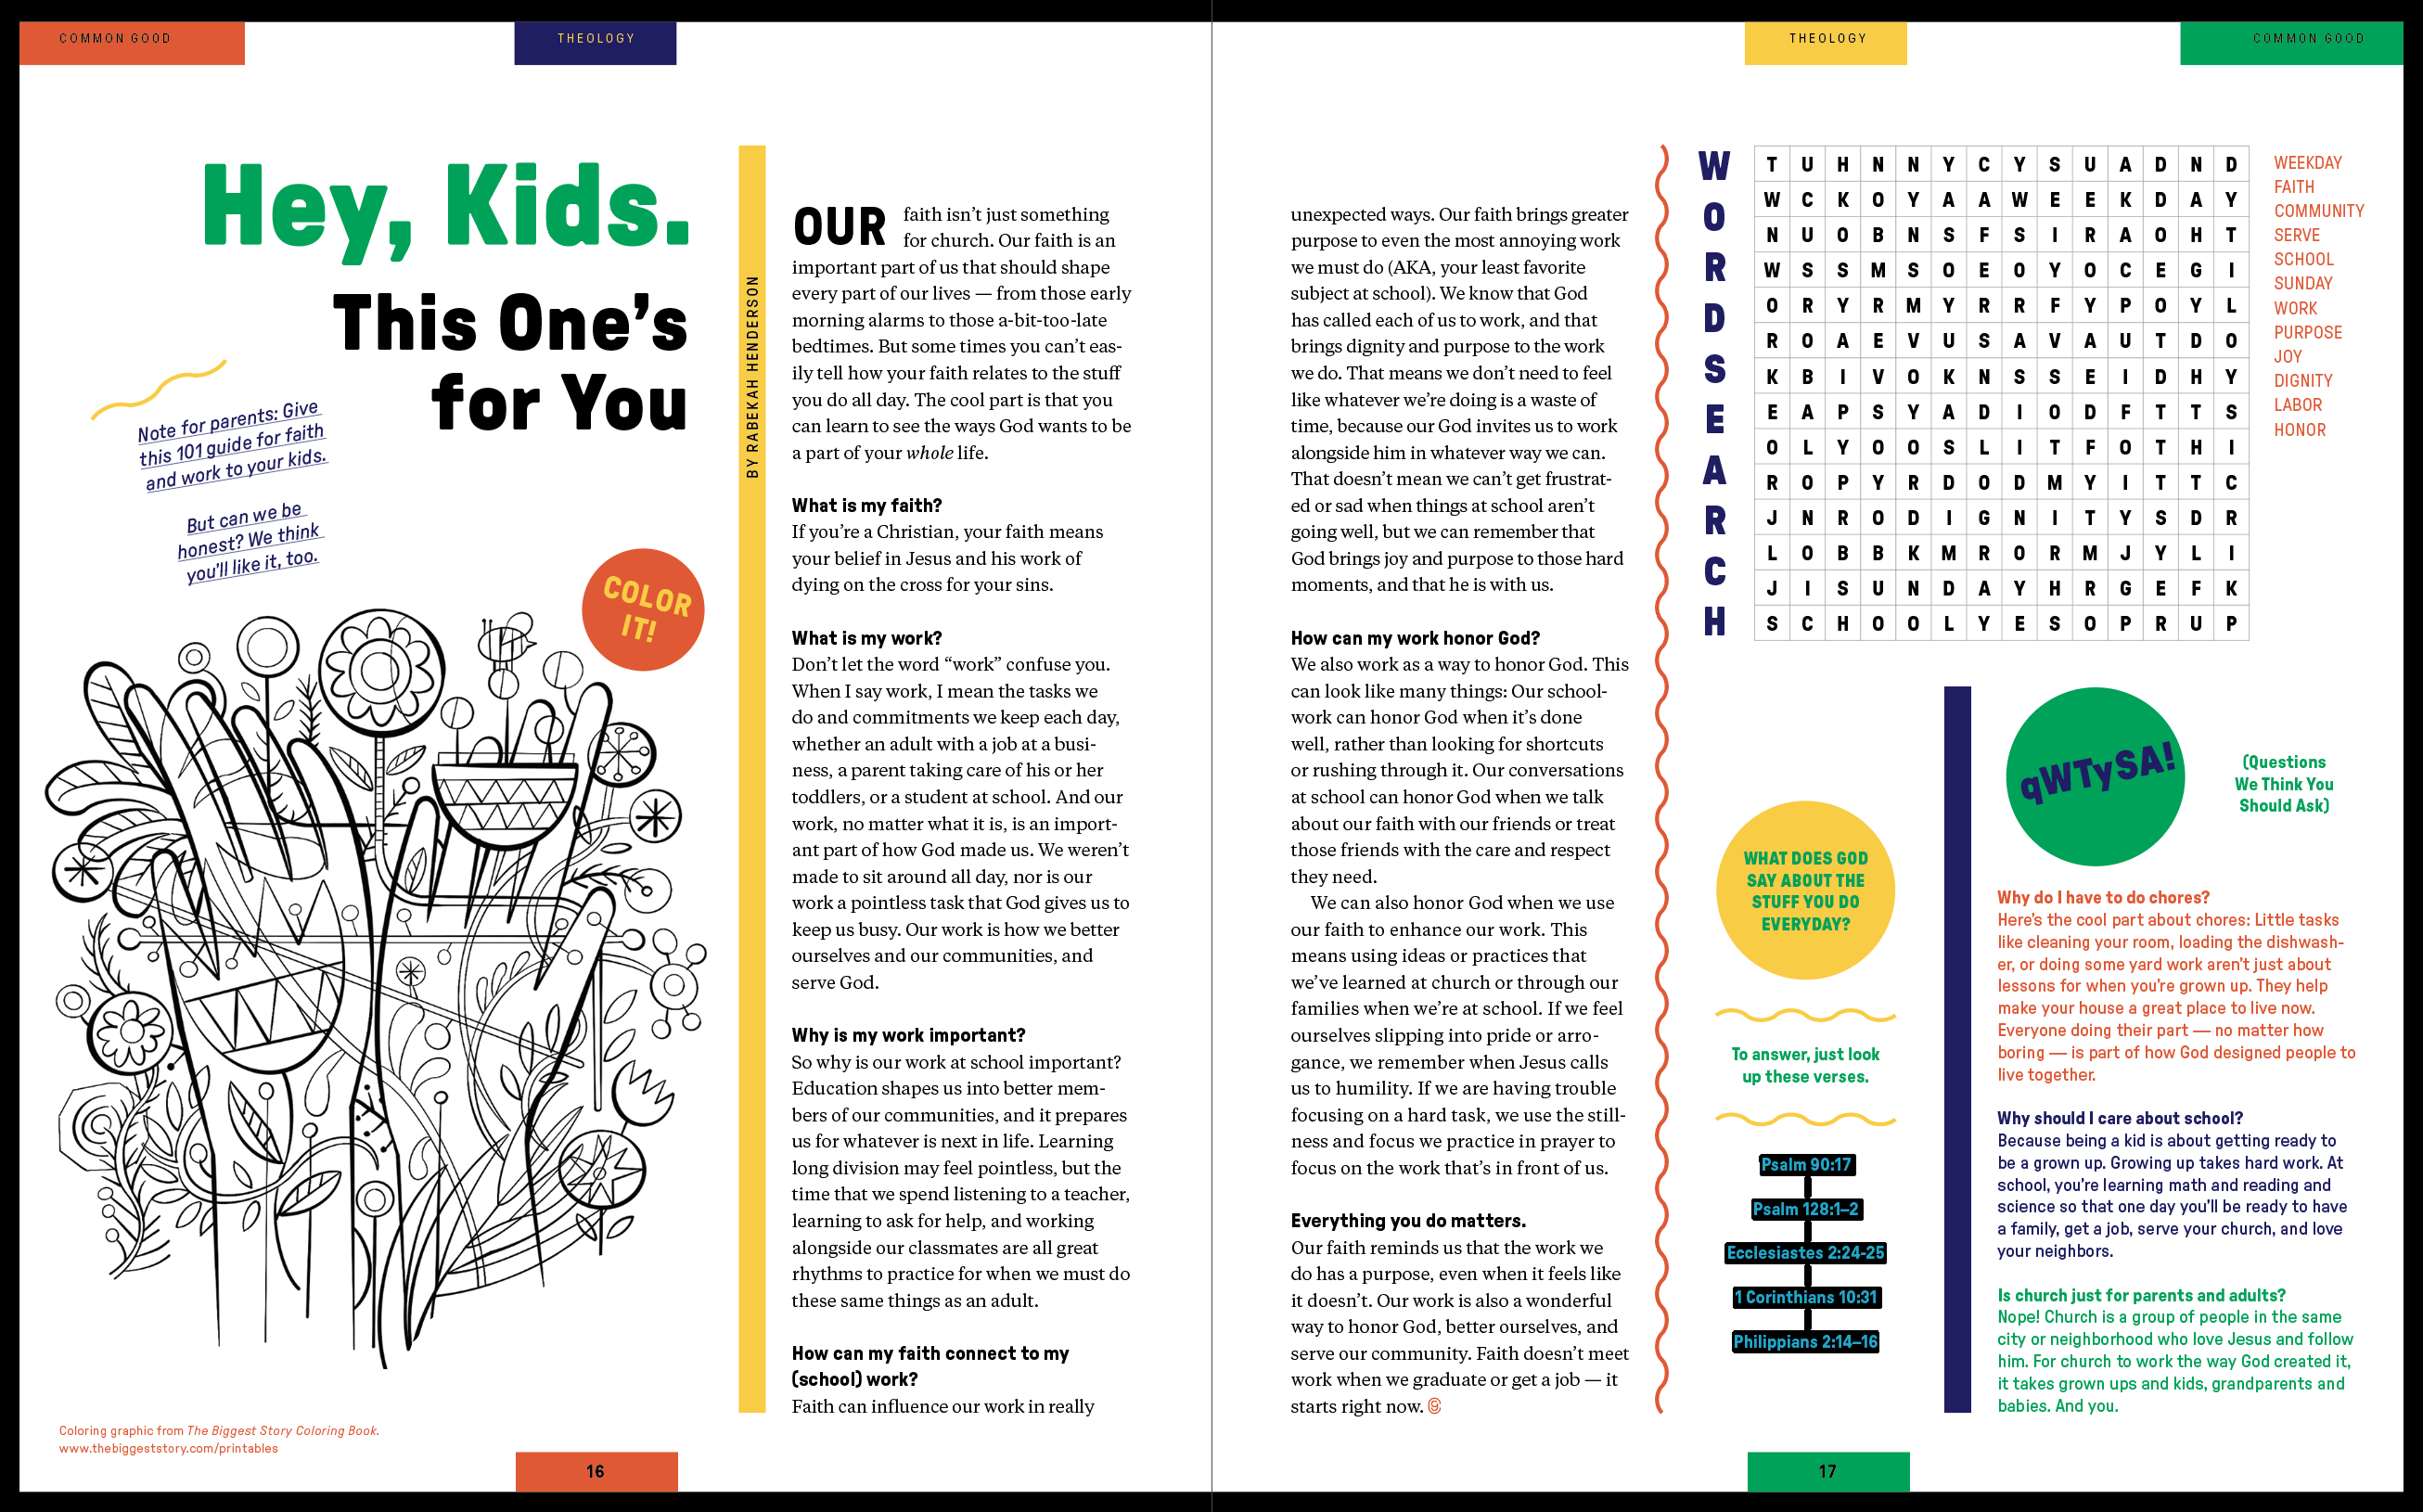 An image of a spread of the interior of Common Good magazine, depicting kids' stuff